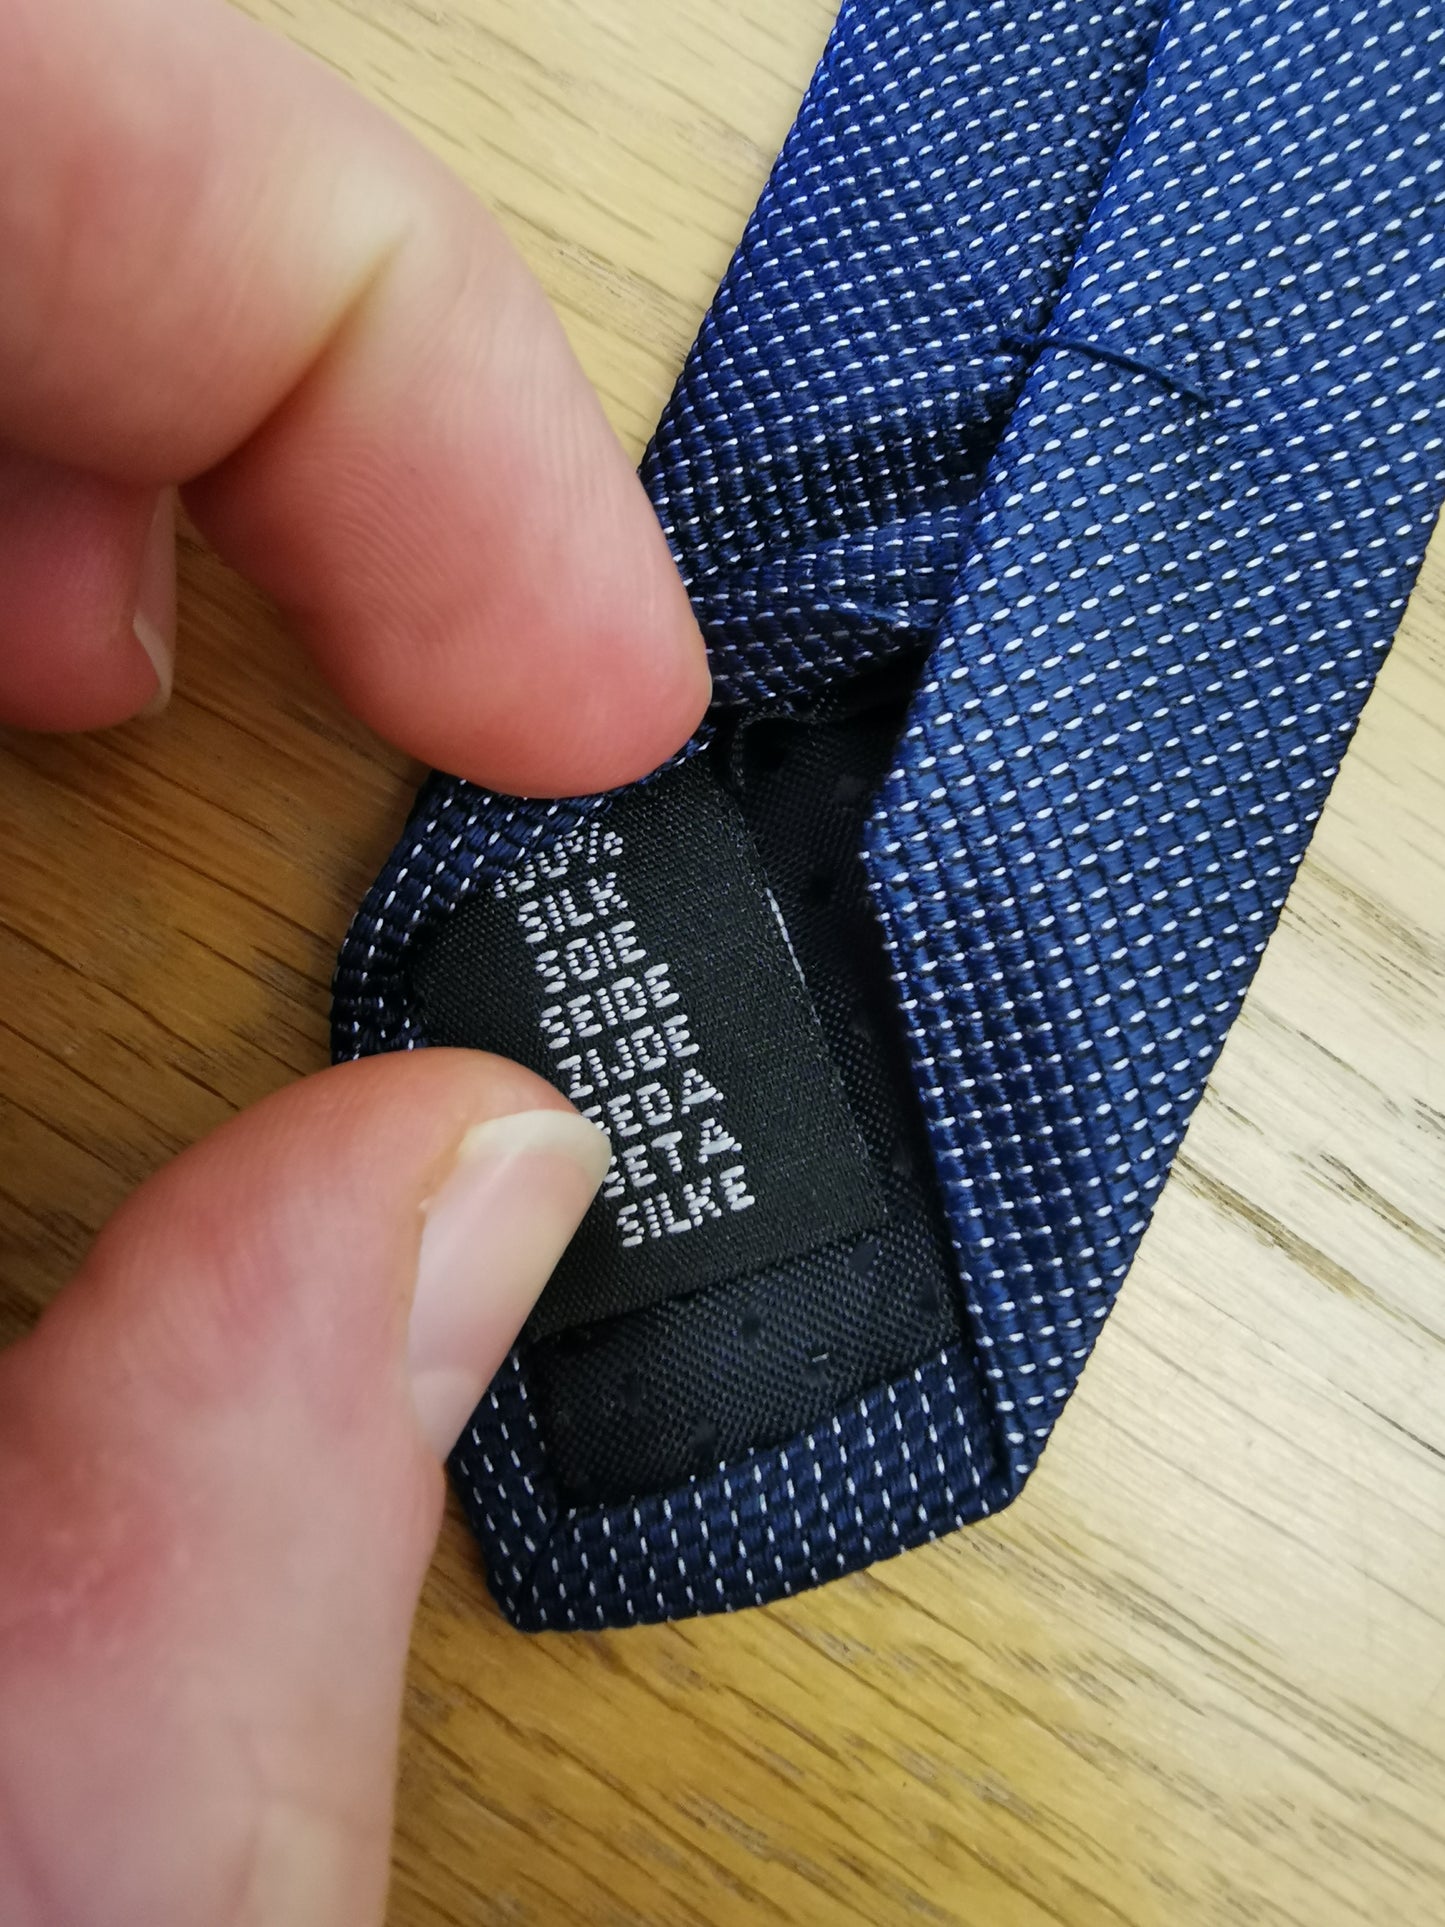 100% silk French Connection tie